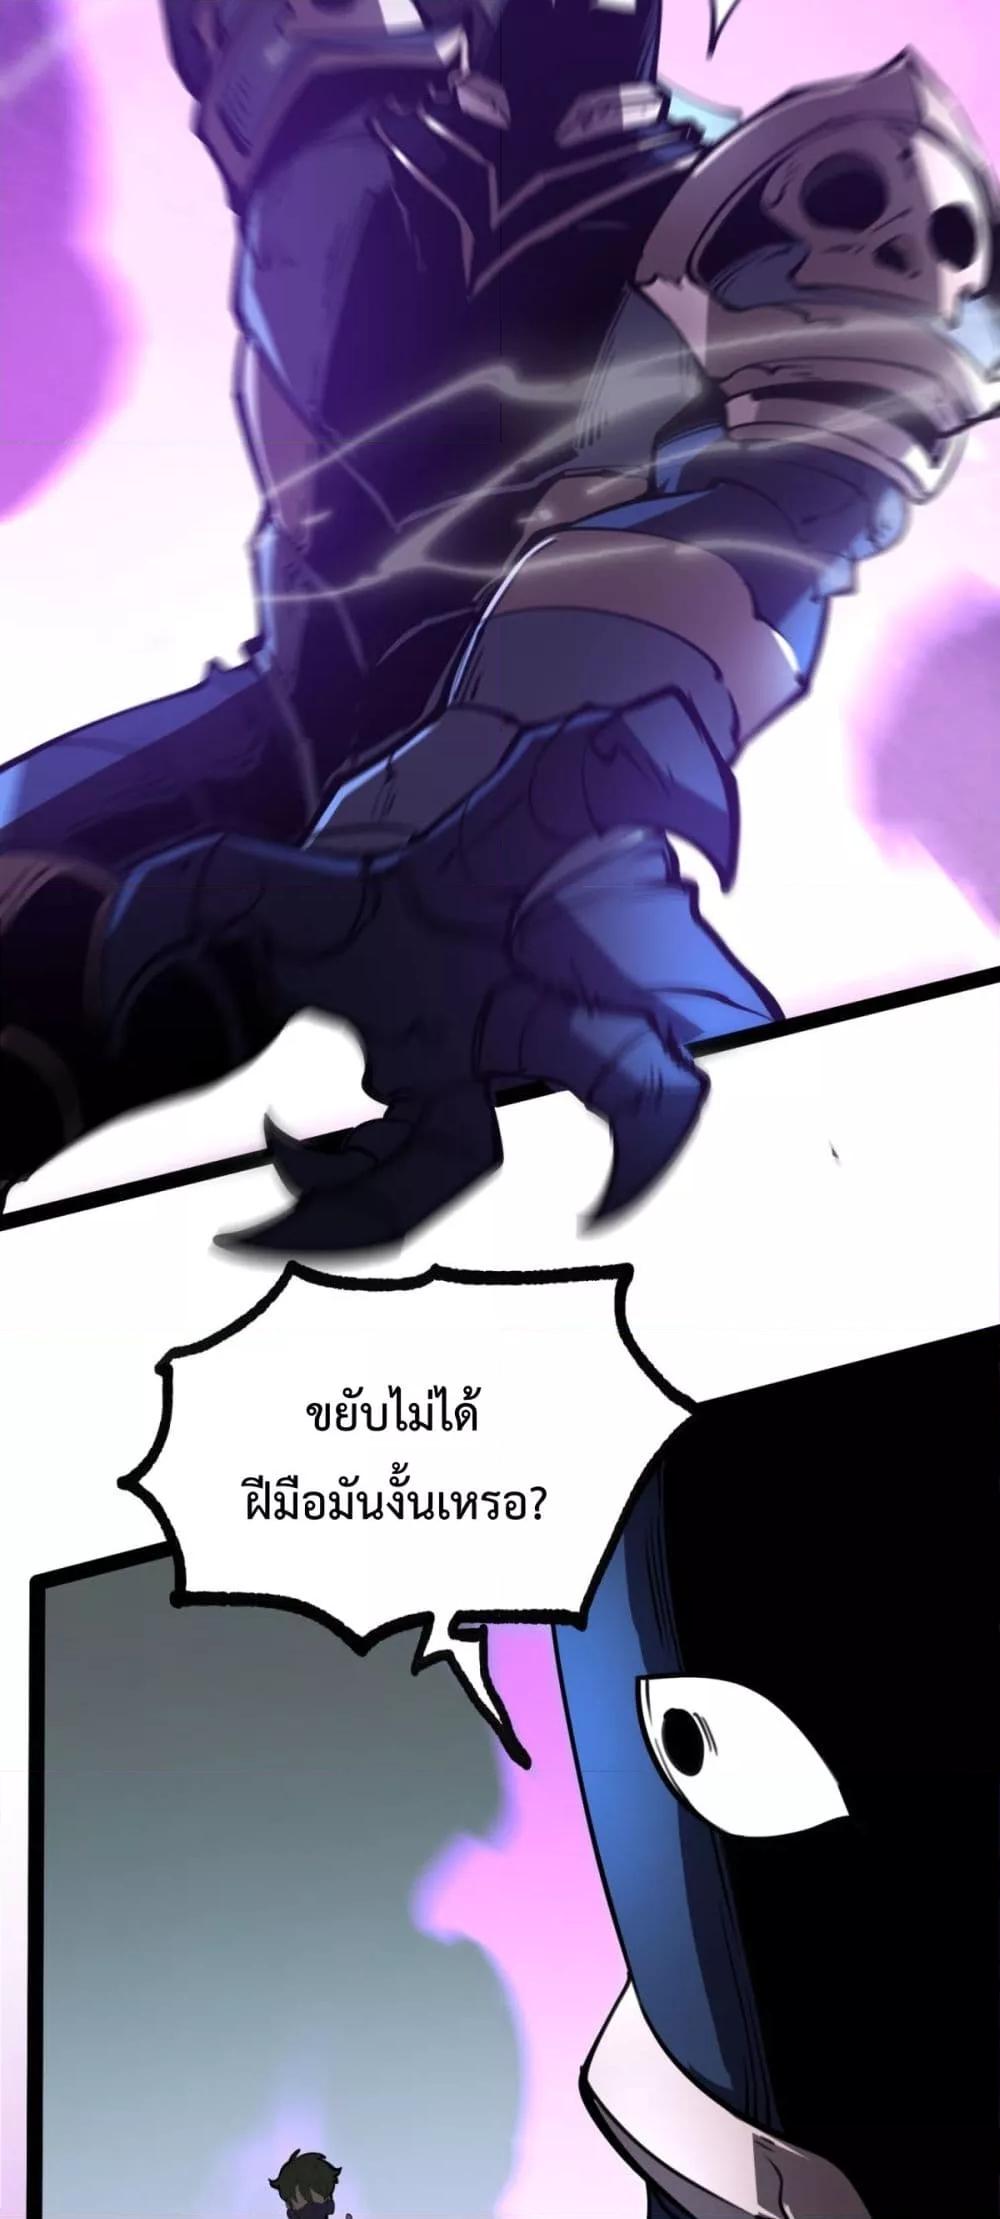 I Became The King by Scavenging โ€“ เนเธเนเธฅเน เน€เธฅเน€เธงเนเธฅเธฅเธฃเธดเนเธ เธ•เธญเธเธ—เธตเน 17 (18)